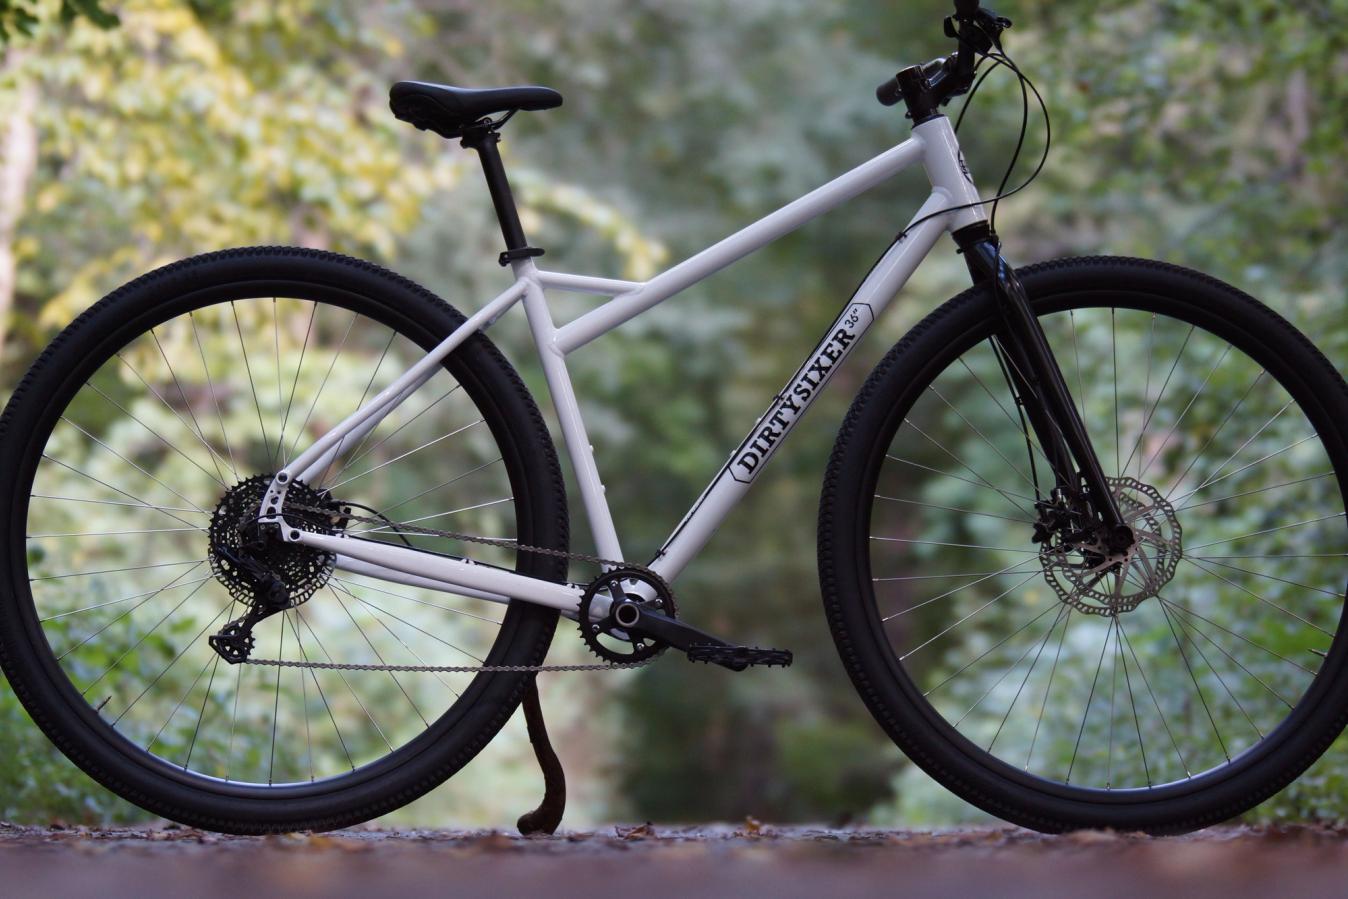 The DirtySixer AllRoad - the biggest commercially available bike in the world